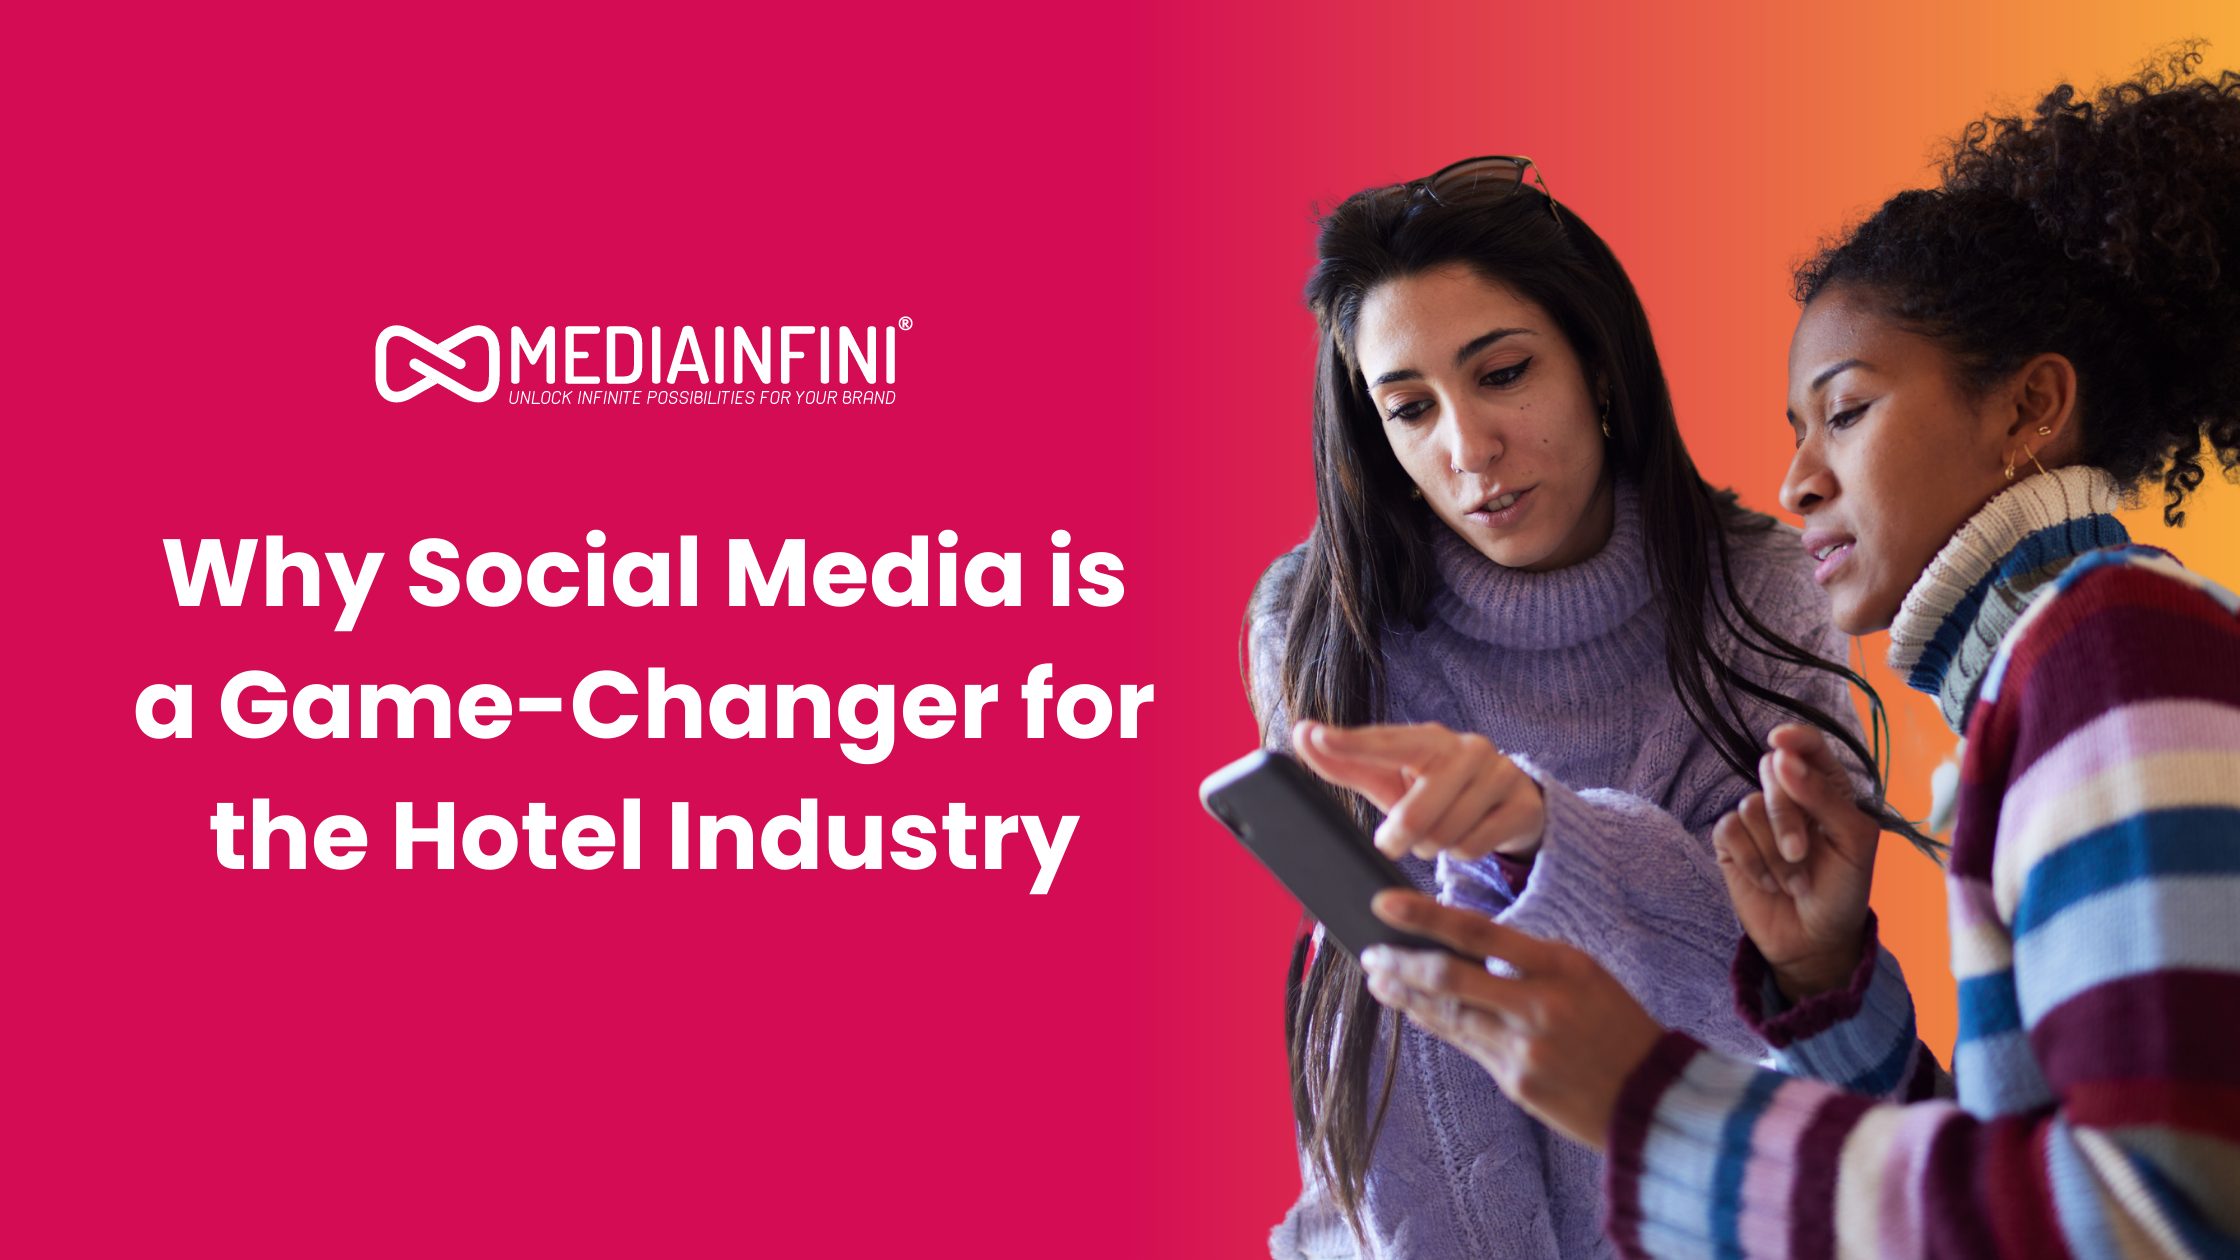 Why Social Media is a Game-Changer for the Hotel Industry | Social Media for Hotel